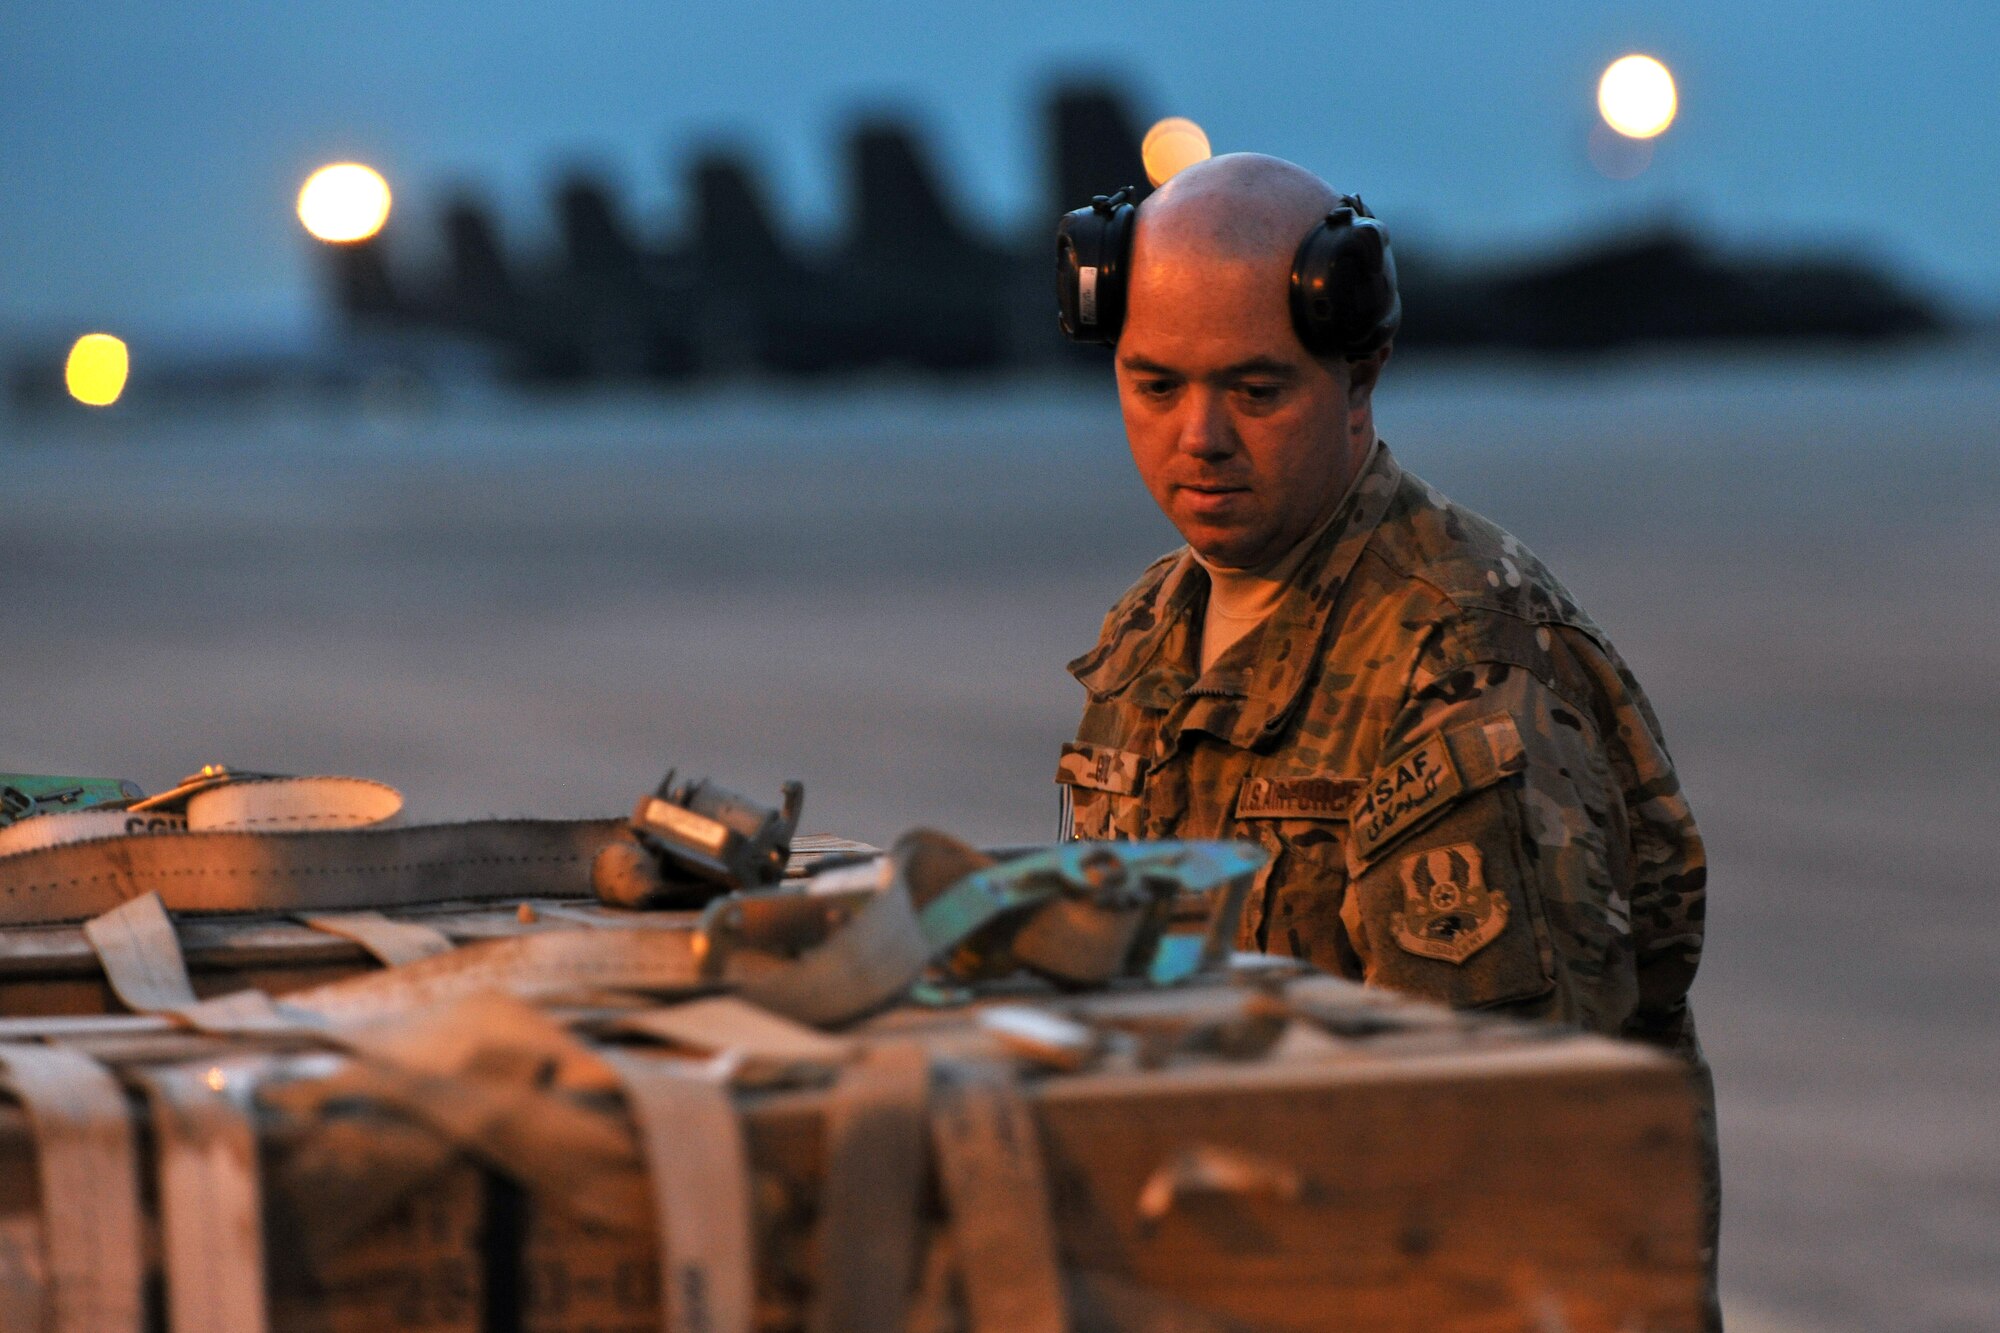 Tech. Sgt. Jason E. Goul, 455th Expeditionary Aerial Port Squadron, Detachment 3 Aerial Port specialist, builds pallets at the contingency cargo staging yard on Camp Marmal, Afghanistan, Jan 30, 2013. Goul is deployed from the 60th Aerial Port Squadron, Travis Air Force Base, Calif., supporting the International Security Assistance Force Regional Command-North’s transportation mission.  (U.S. Air Force photo/Senior Airman Chris Willis)